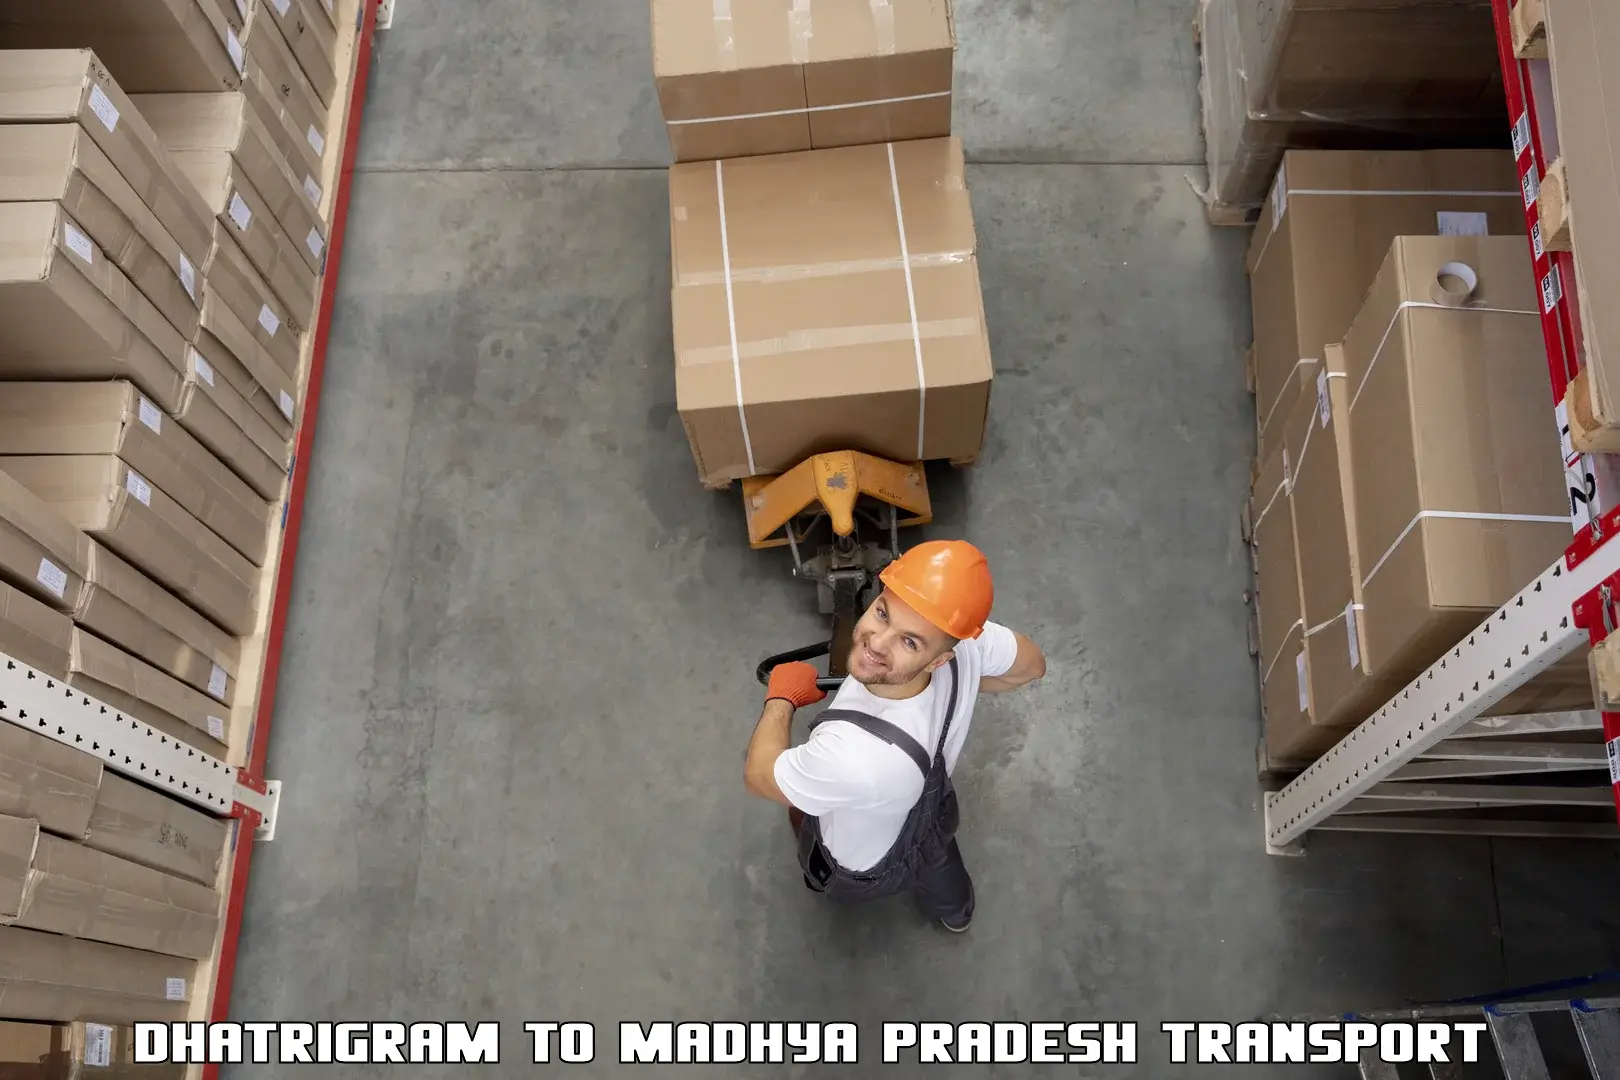 Express transport services Dhatrigram to Jirapur